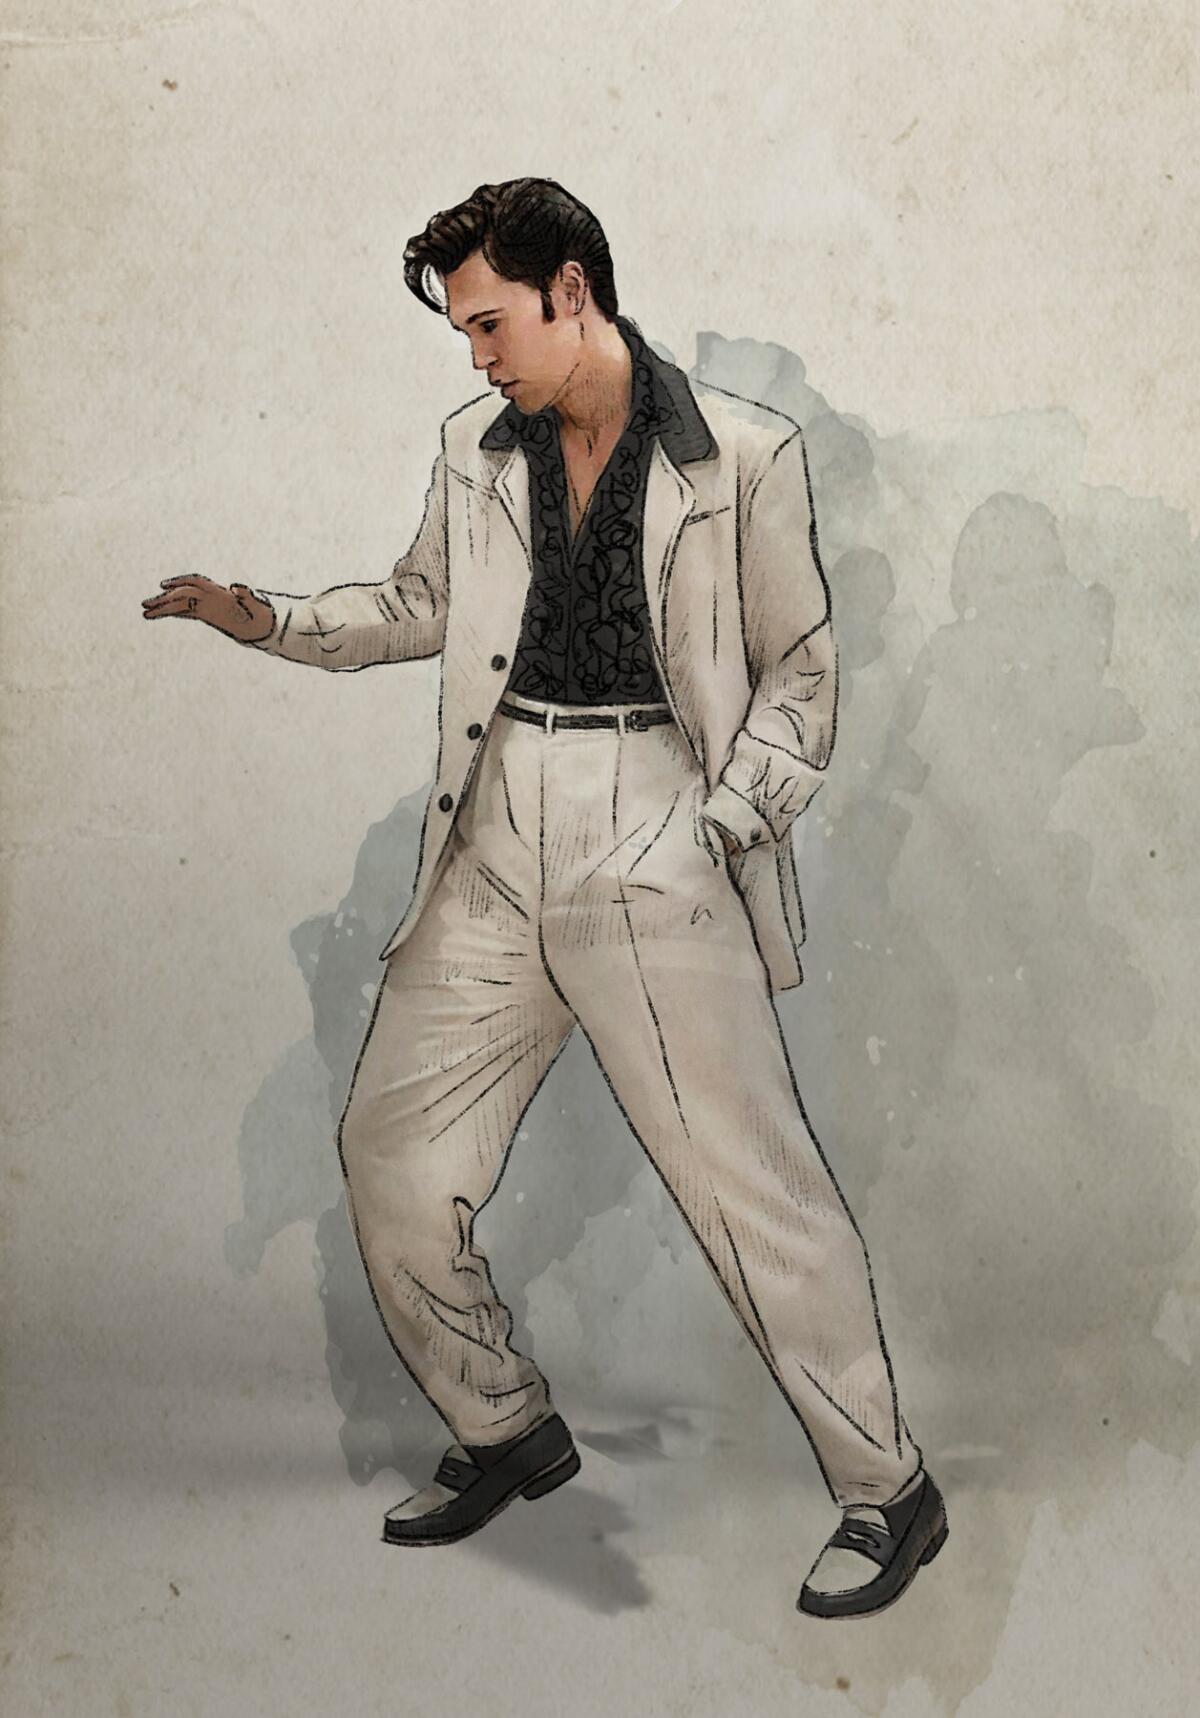 A costume sketch of Elvis in a white suit and black shirt.